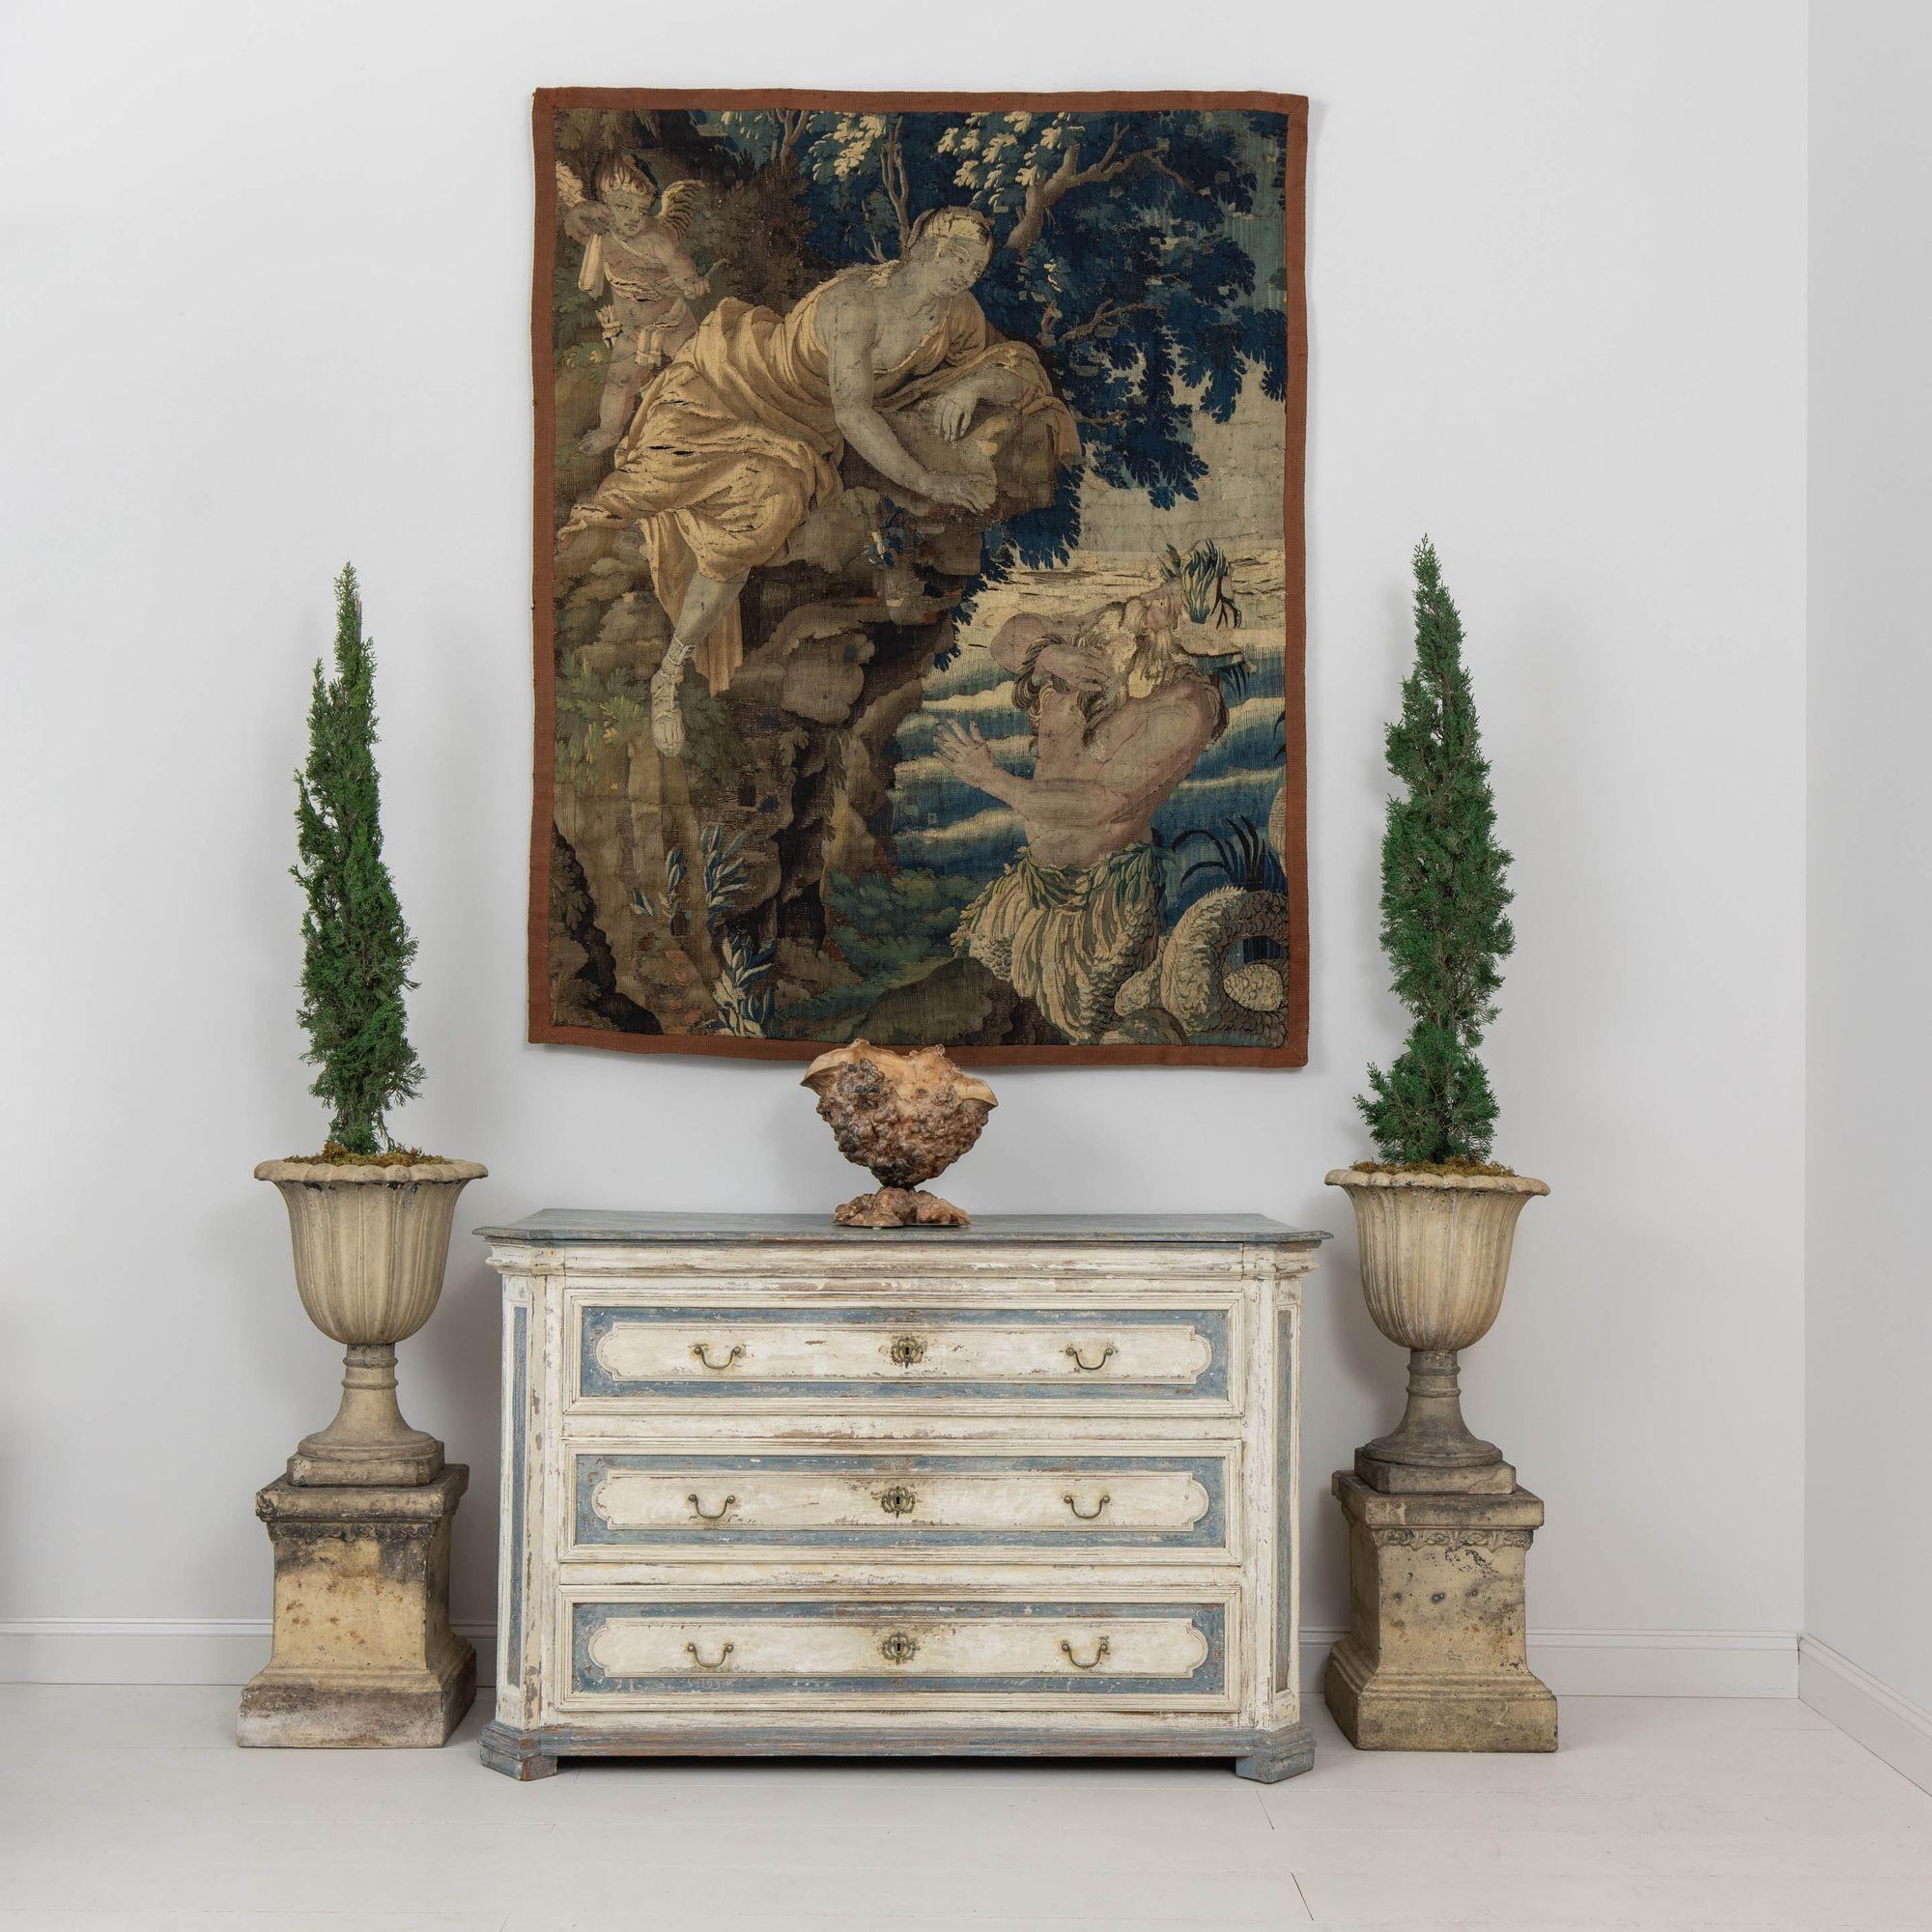 A large-scale French commode from the 18th century in the Louis Philippe style with hand-painted detail, including a hand-painted marbleized top. Shaped top and canted sides with raised panel drawer fronts. Three deep drawers that move easily.